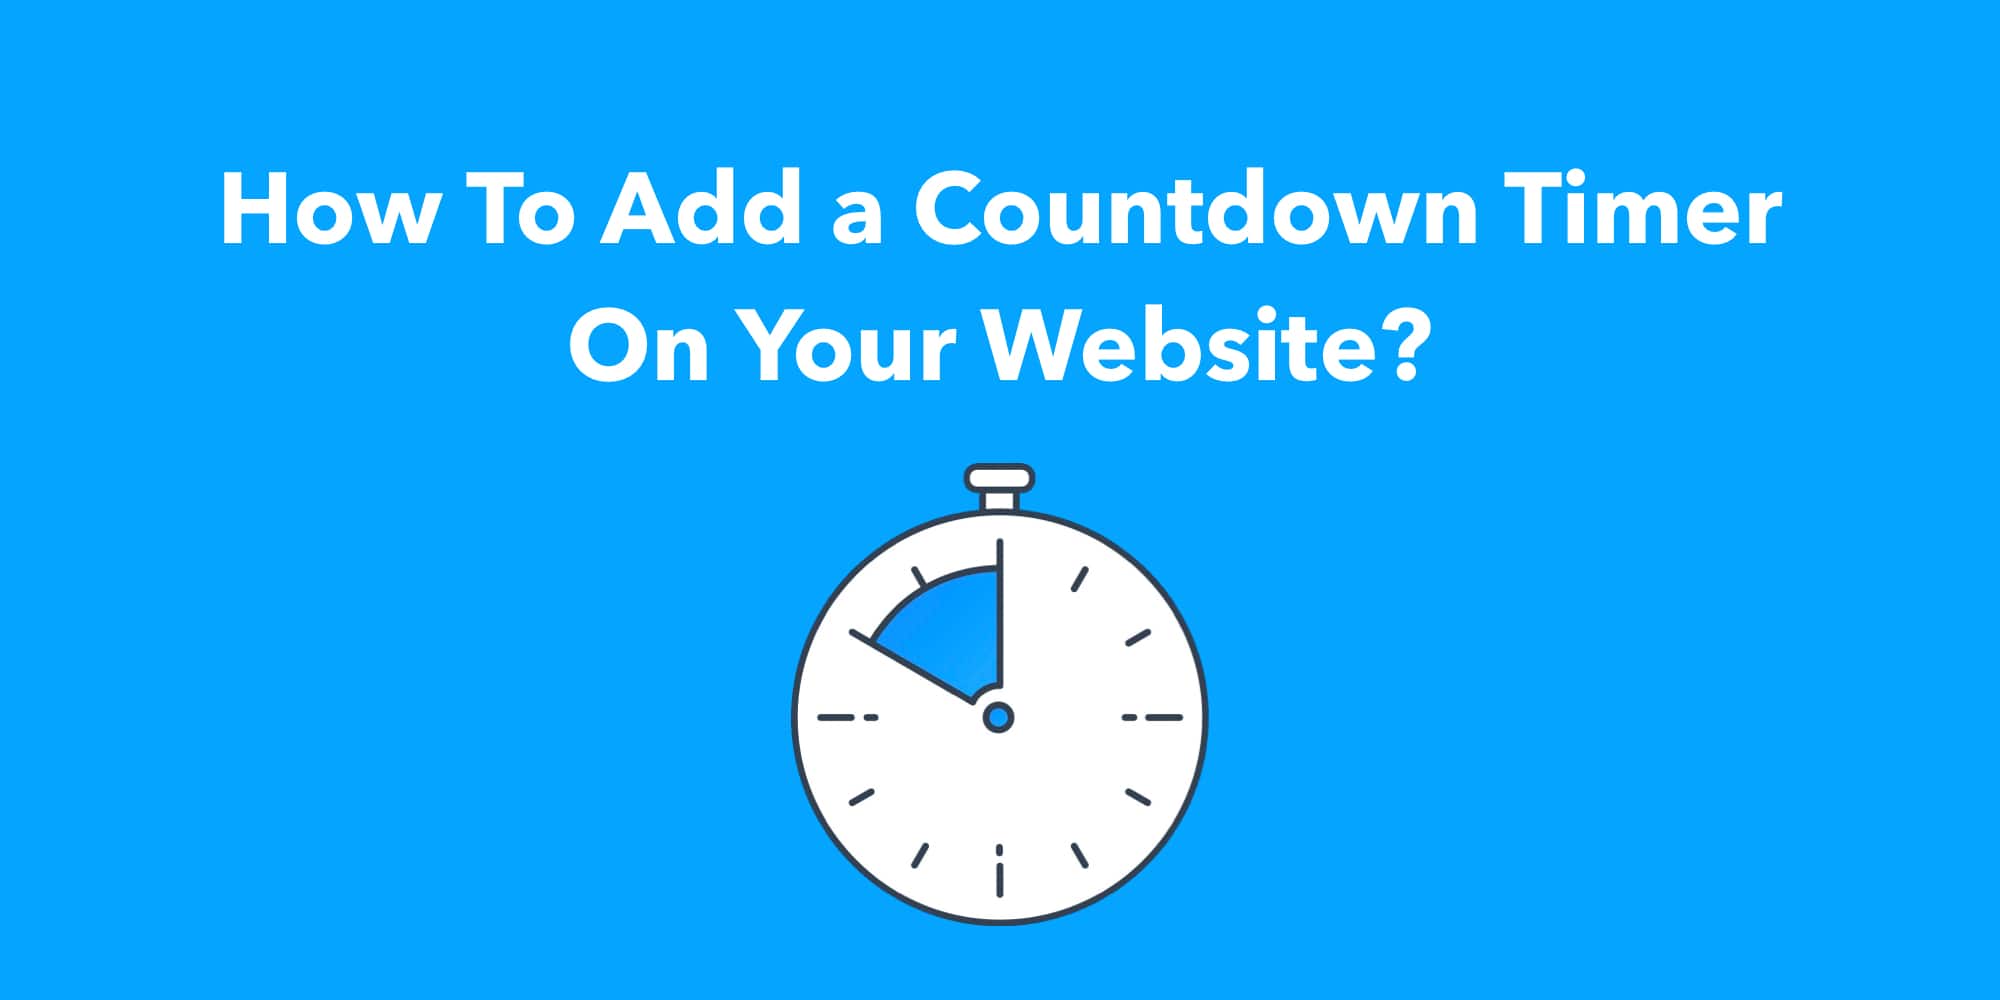 How To Add a Countdown Timer On Your Website?